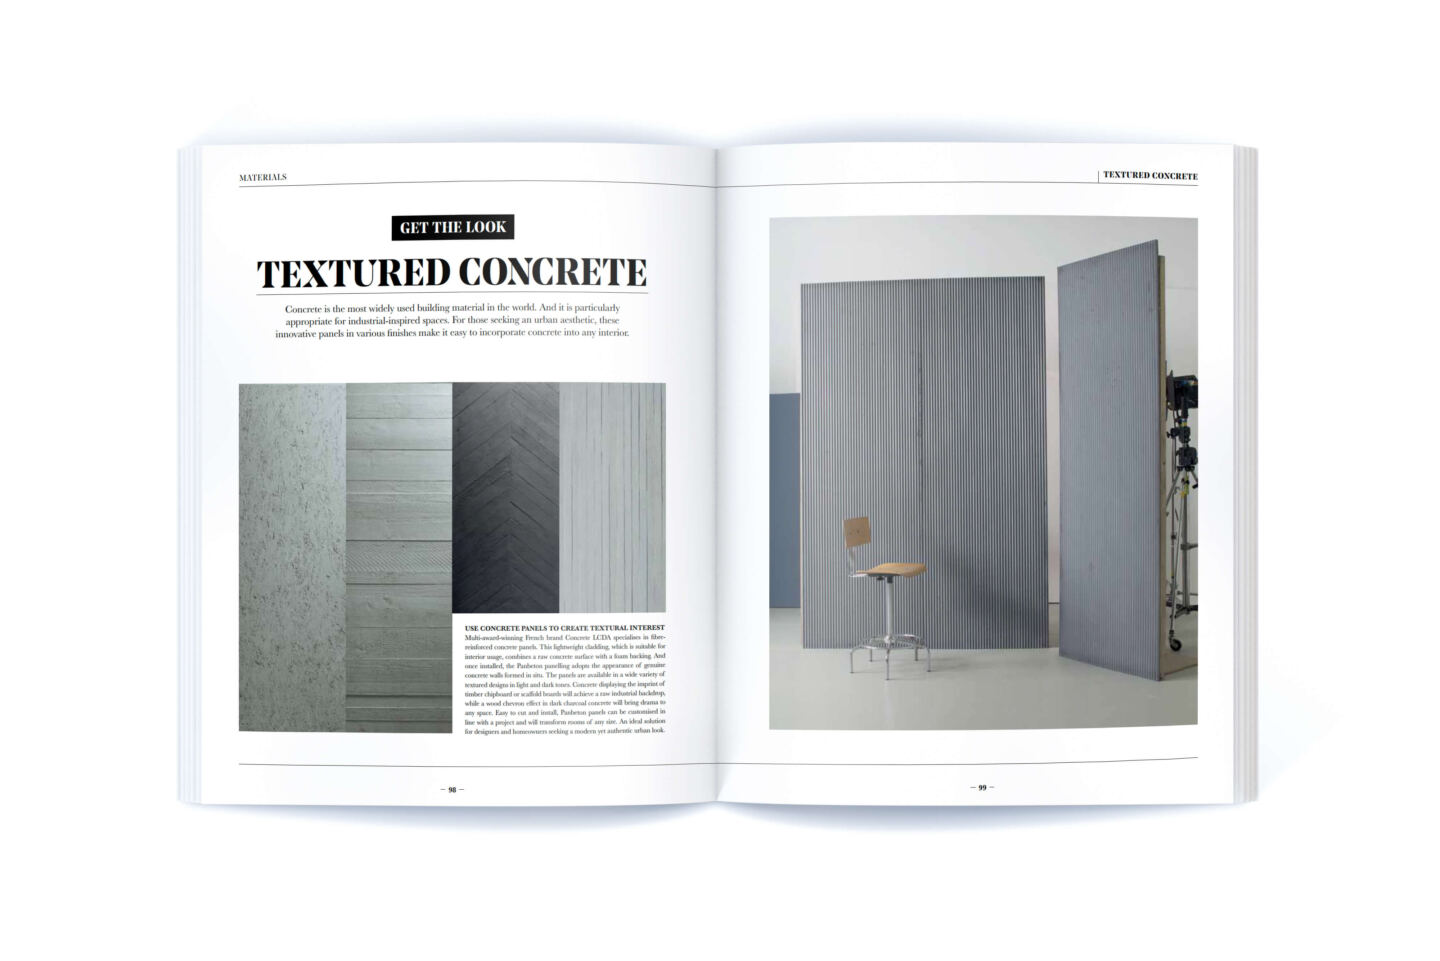 A spread of the book Hotel to Home all about textured concrete